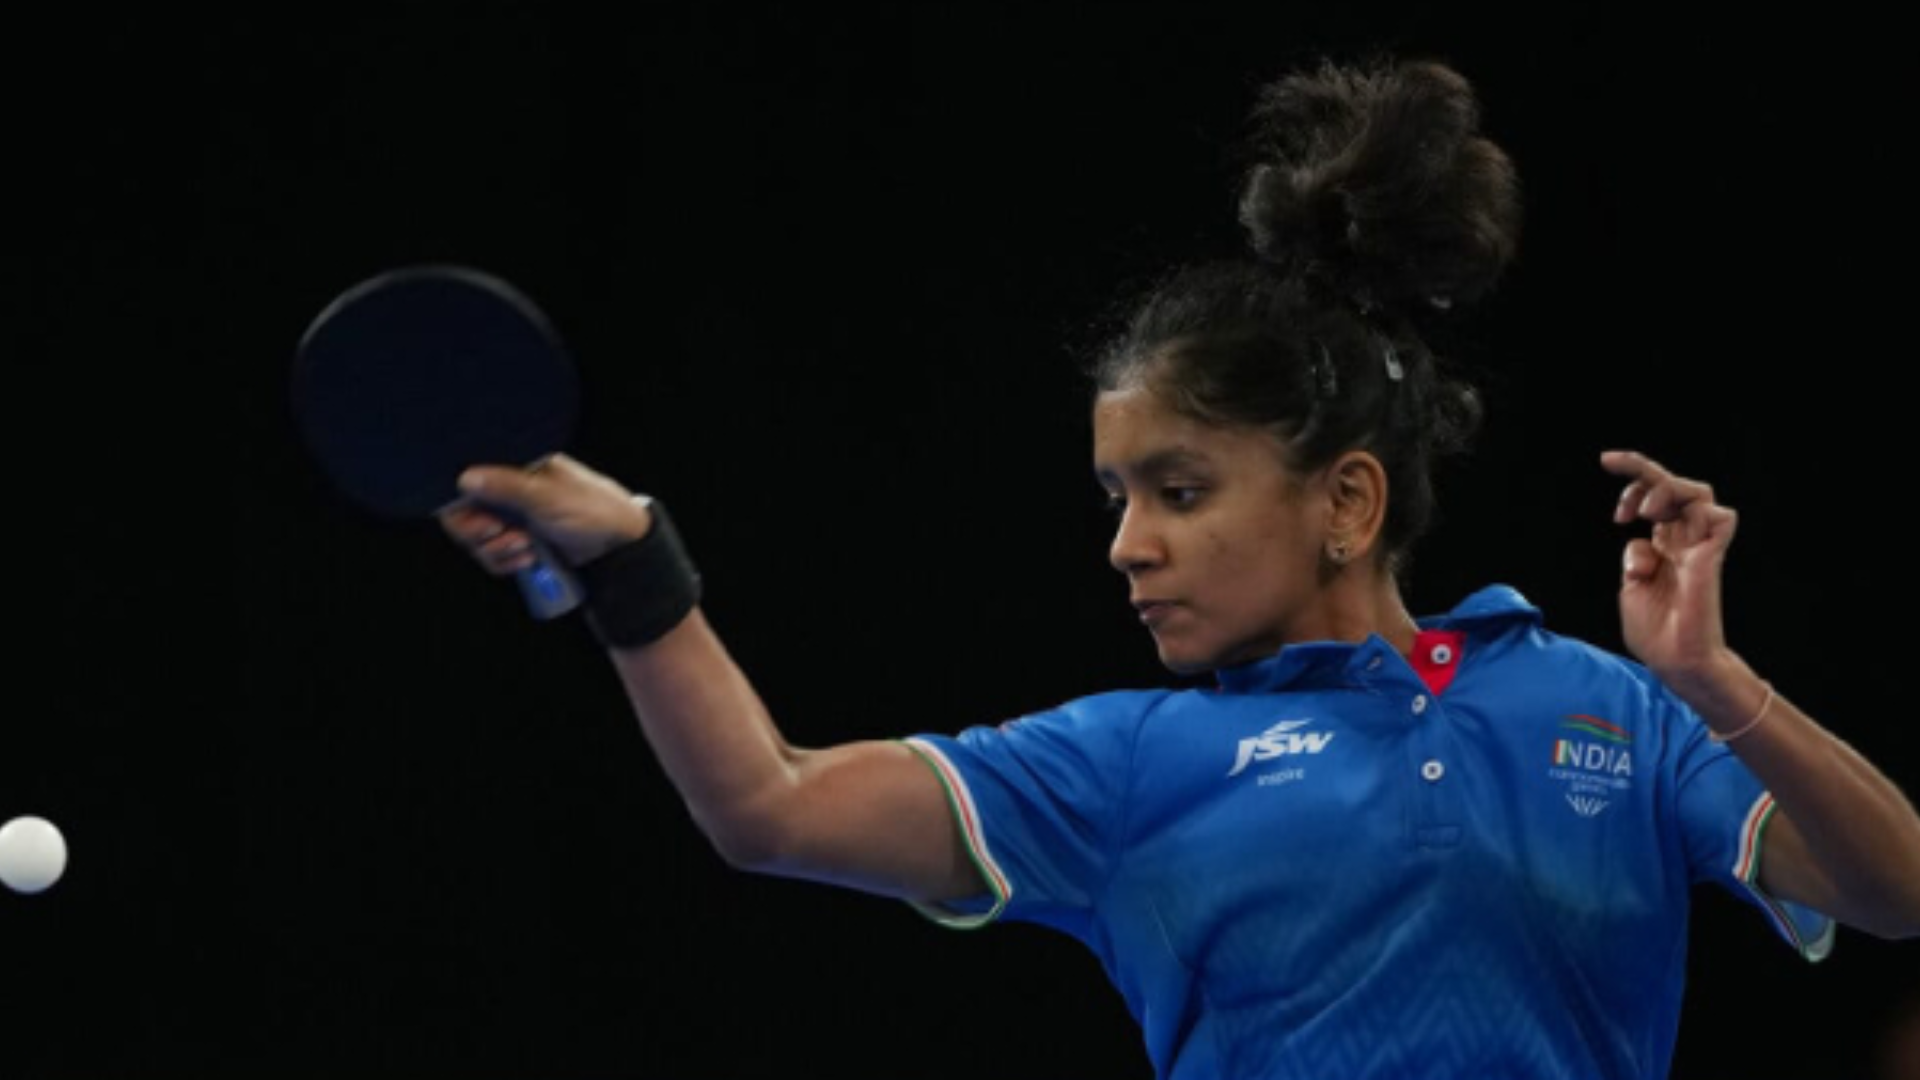 A career high champion Sreeja Akula is aiming to reach the 2024 Olympics in Paris